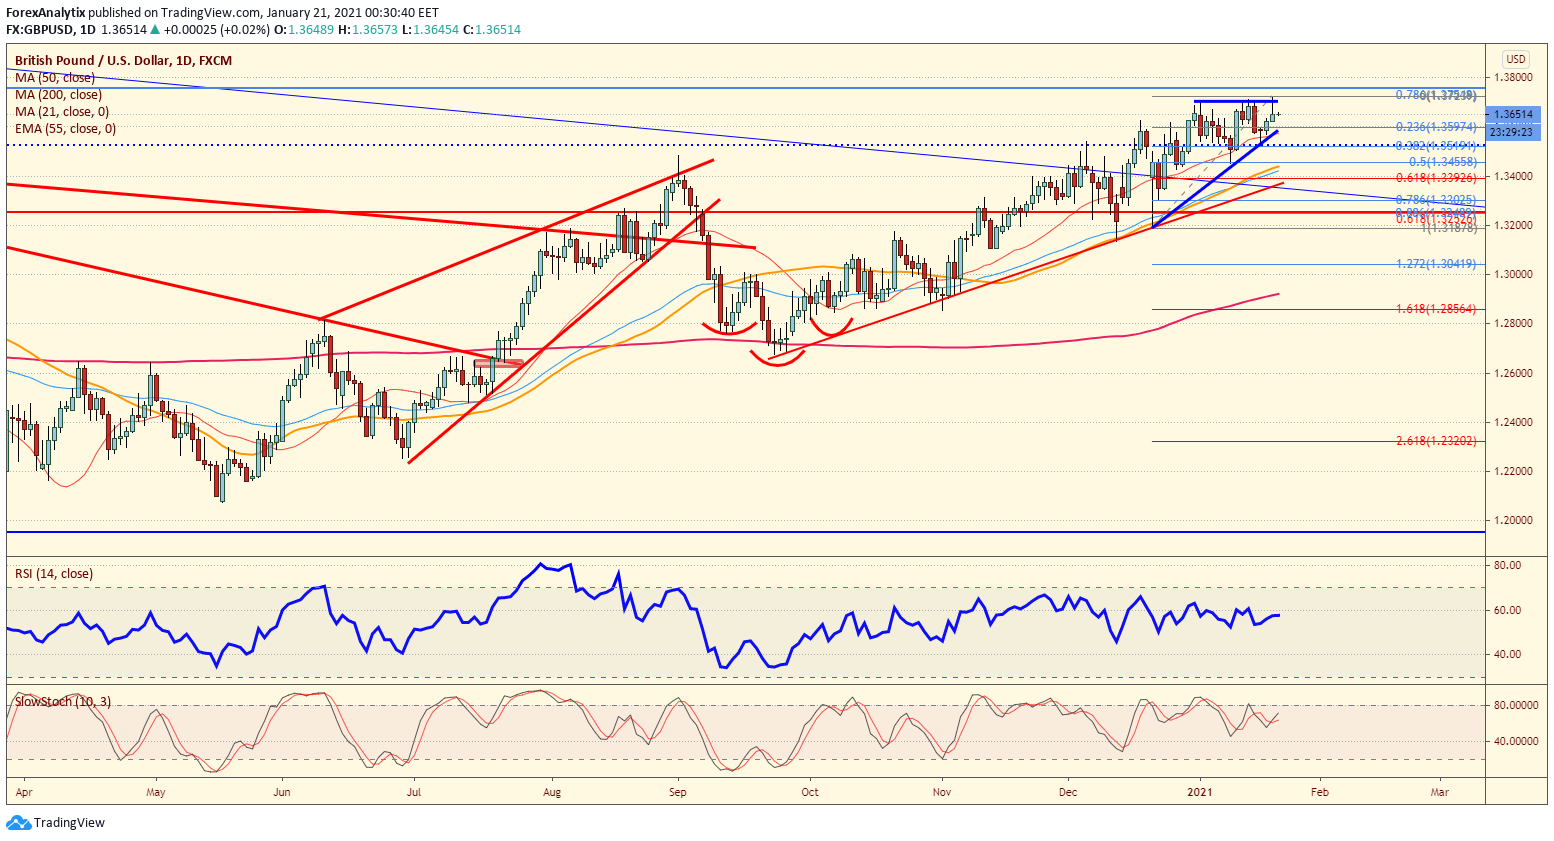 GBP/USD Daily Chart.